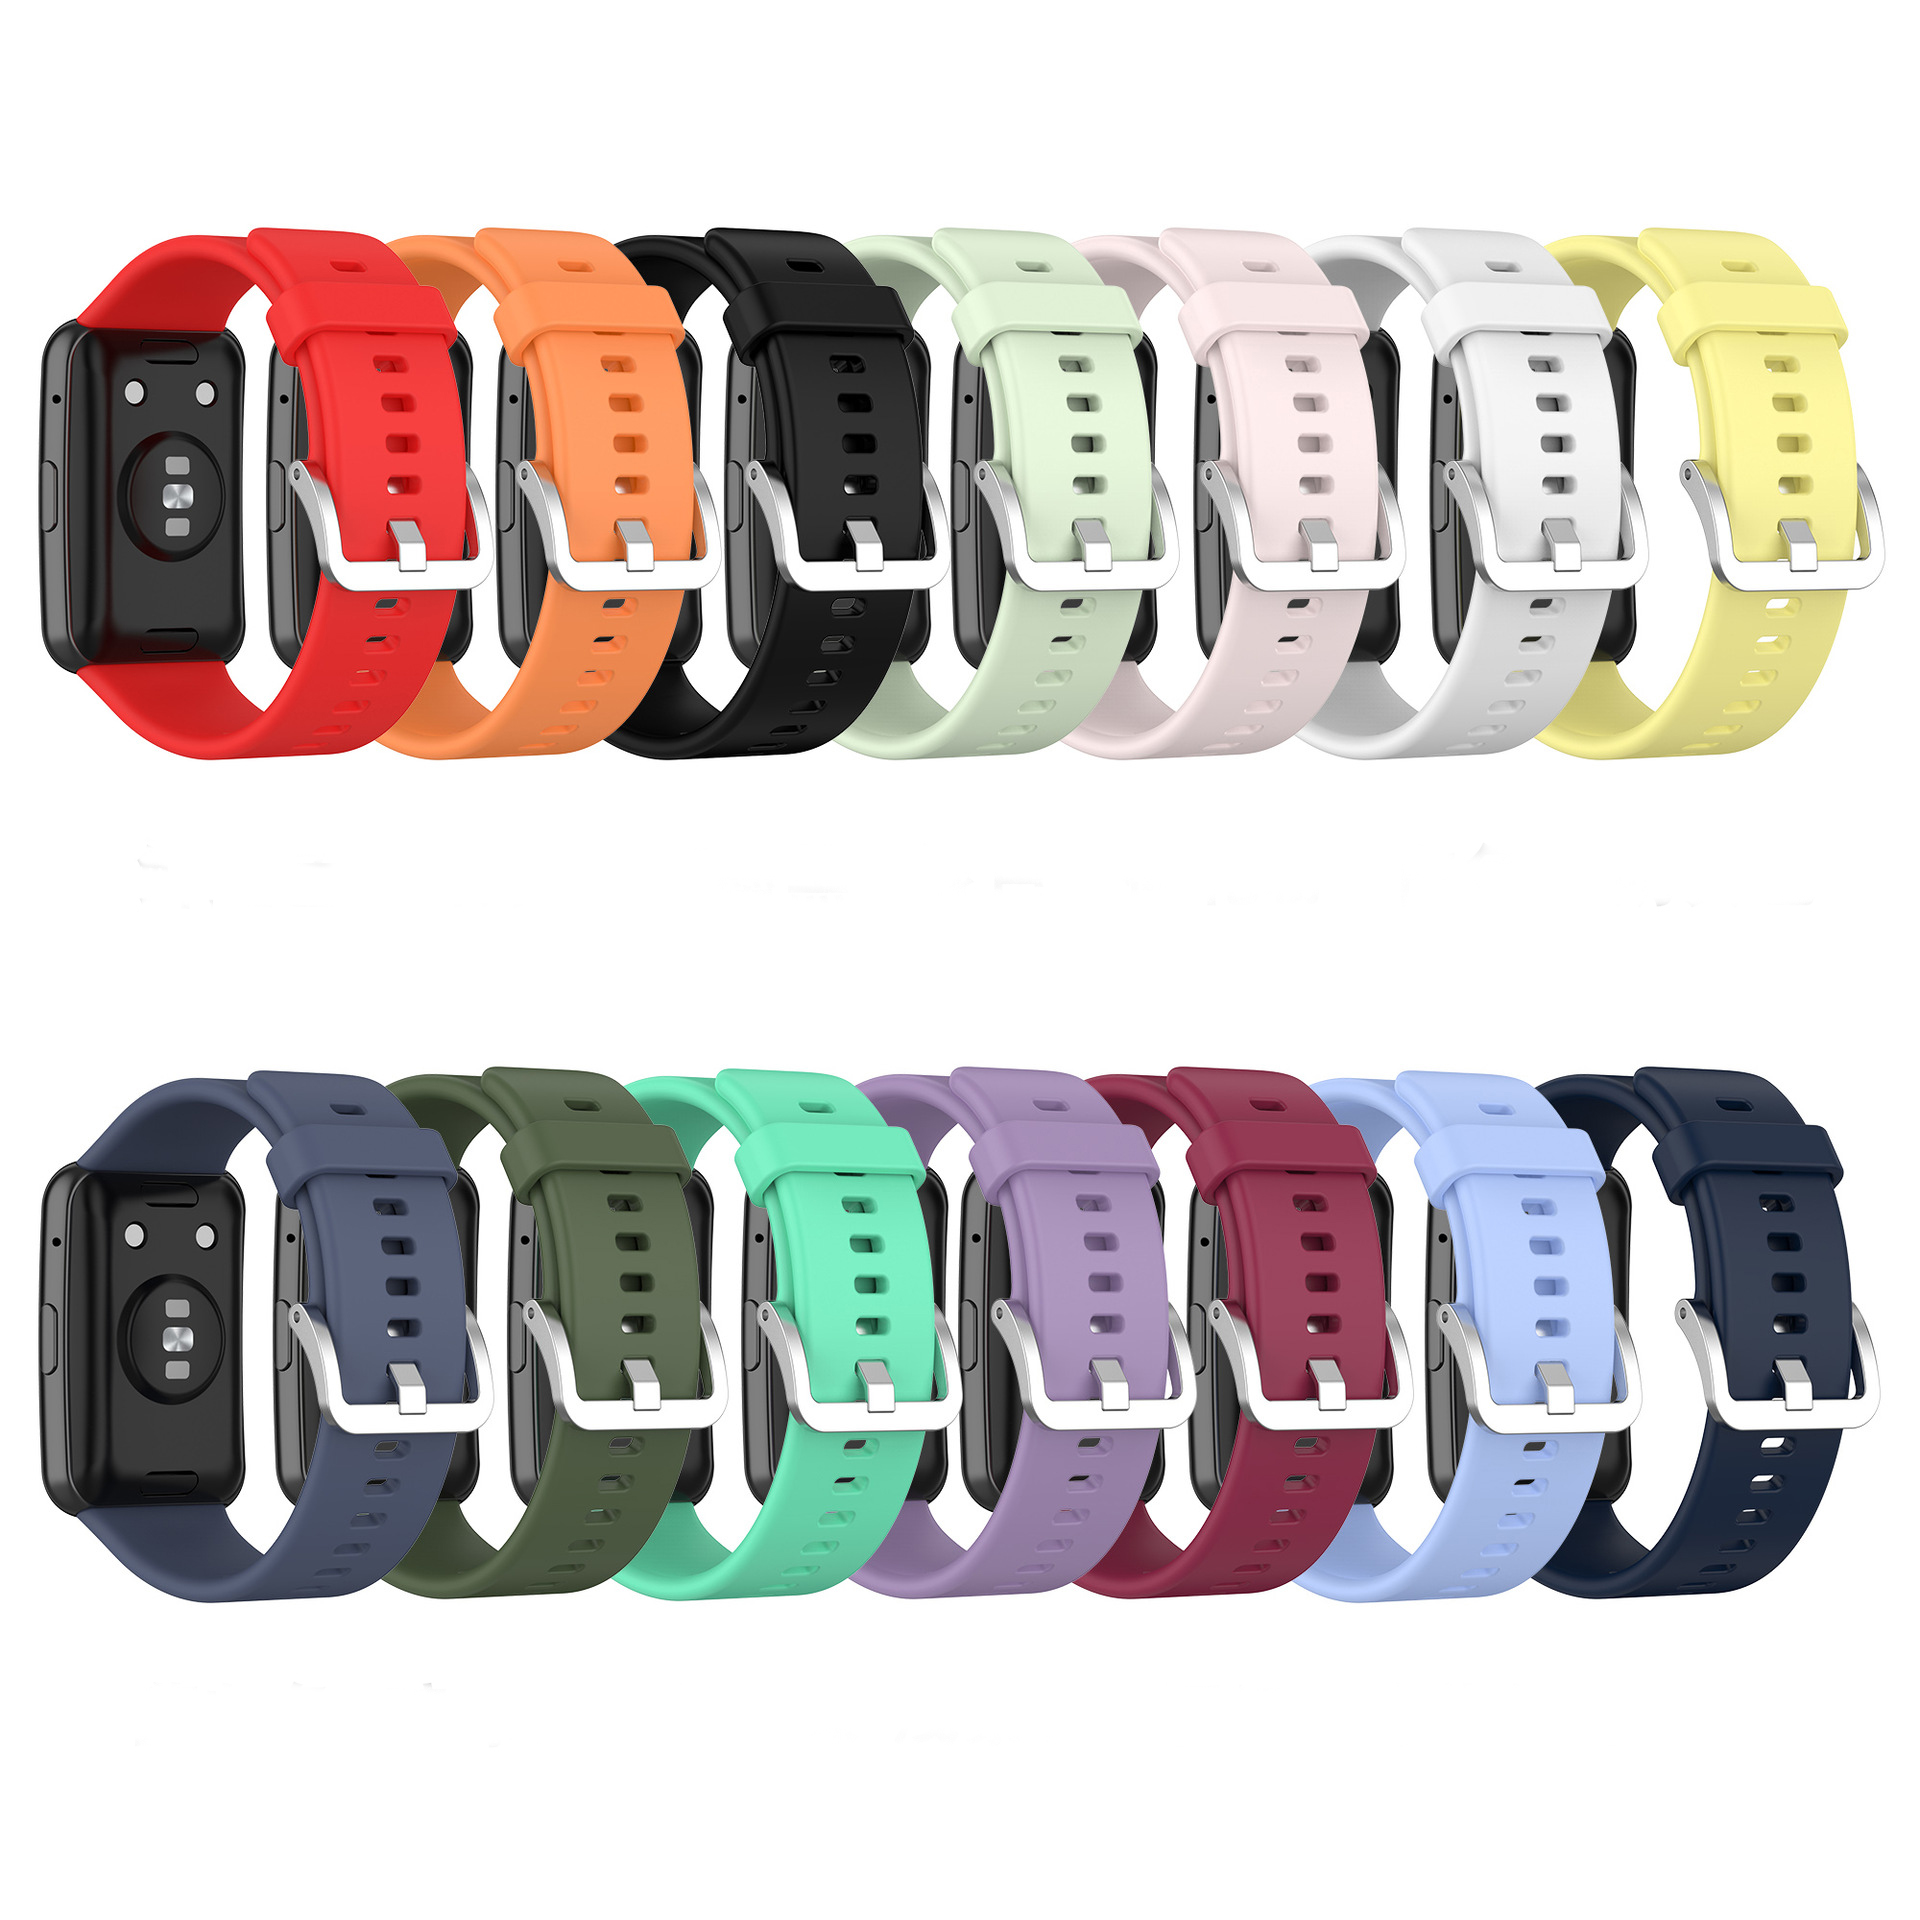 Bakeey-Multi-color-Silicone-Replacement-Strap-Smart-Watch-Band-For-Huawei-Watch-Fit-1782936-2